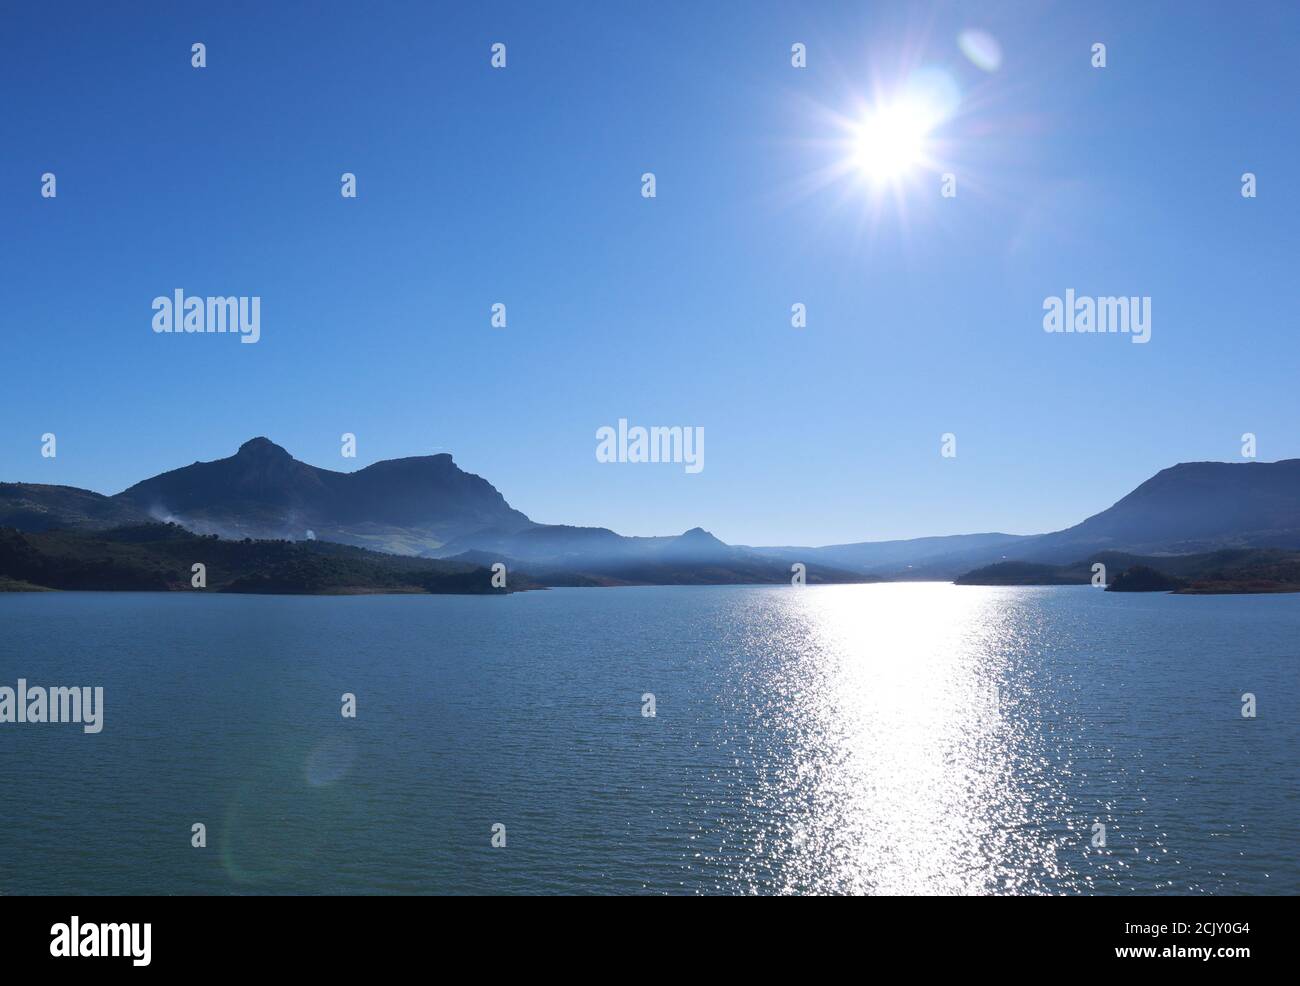 Andalusia, Spain, blue sea view on a hot clear summer day, mountains and landscape with sun flare. Stock Photo